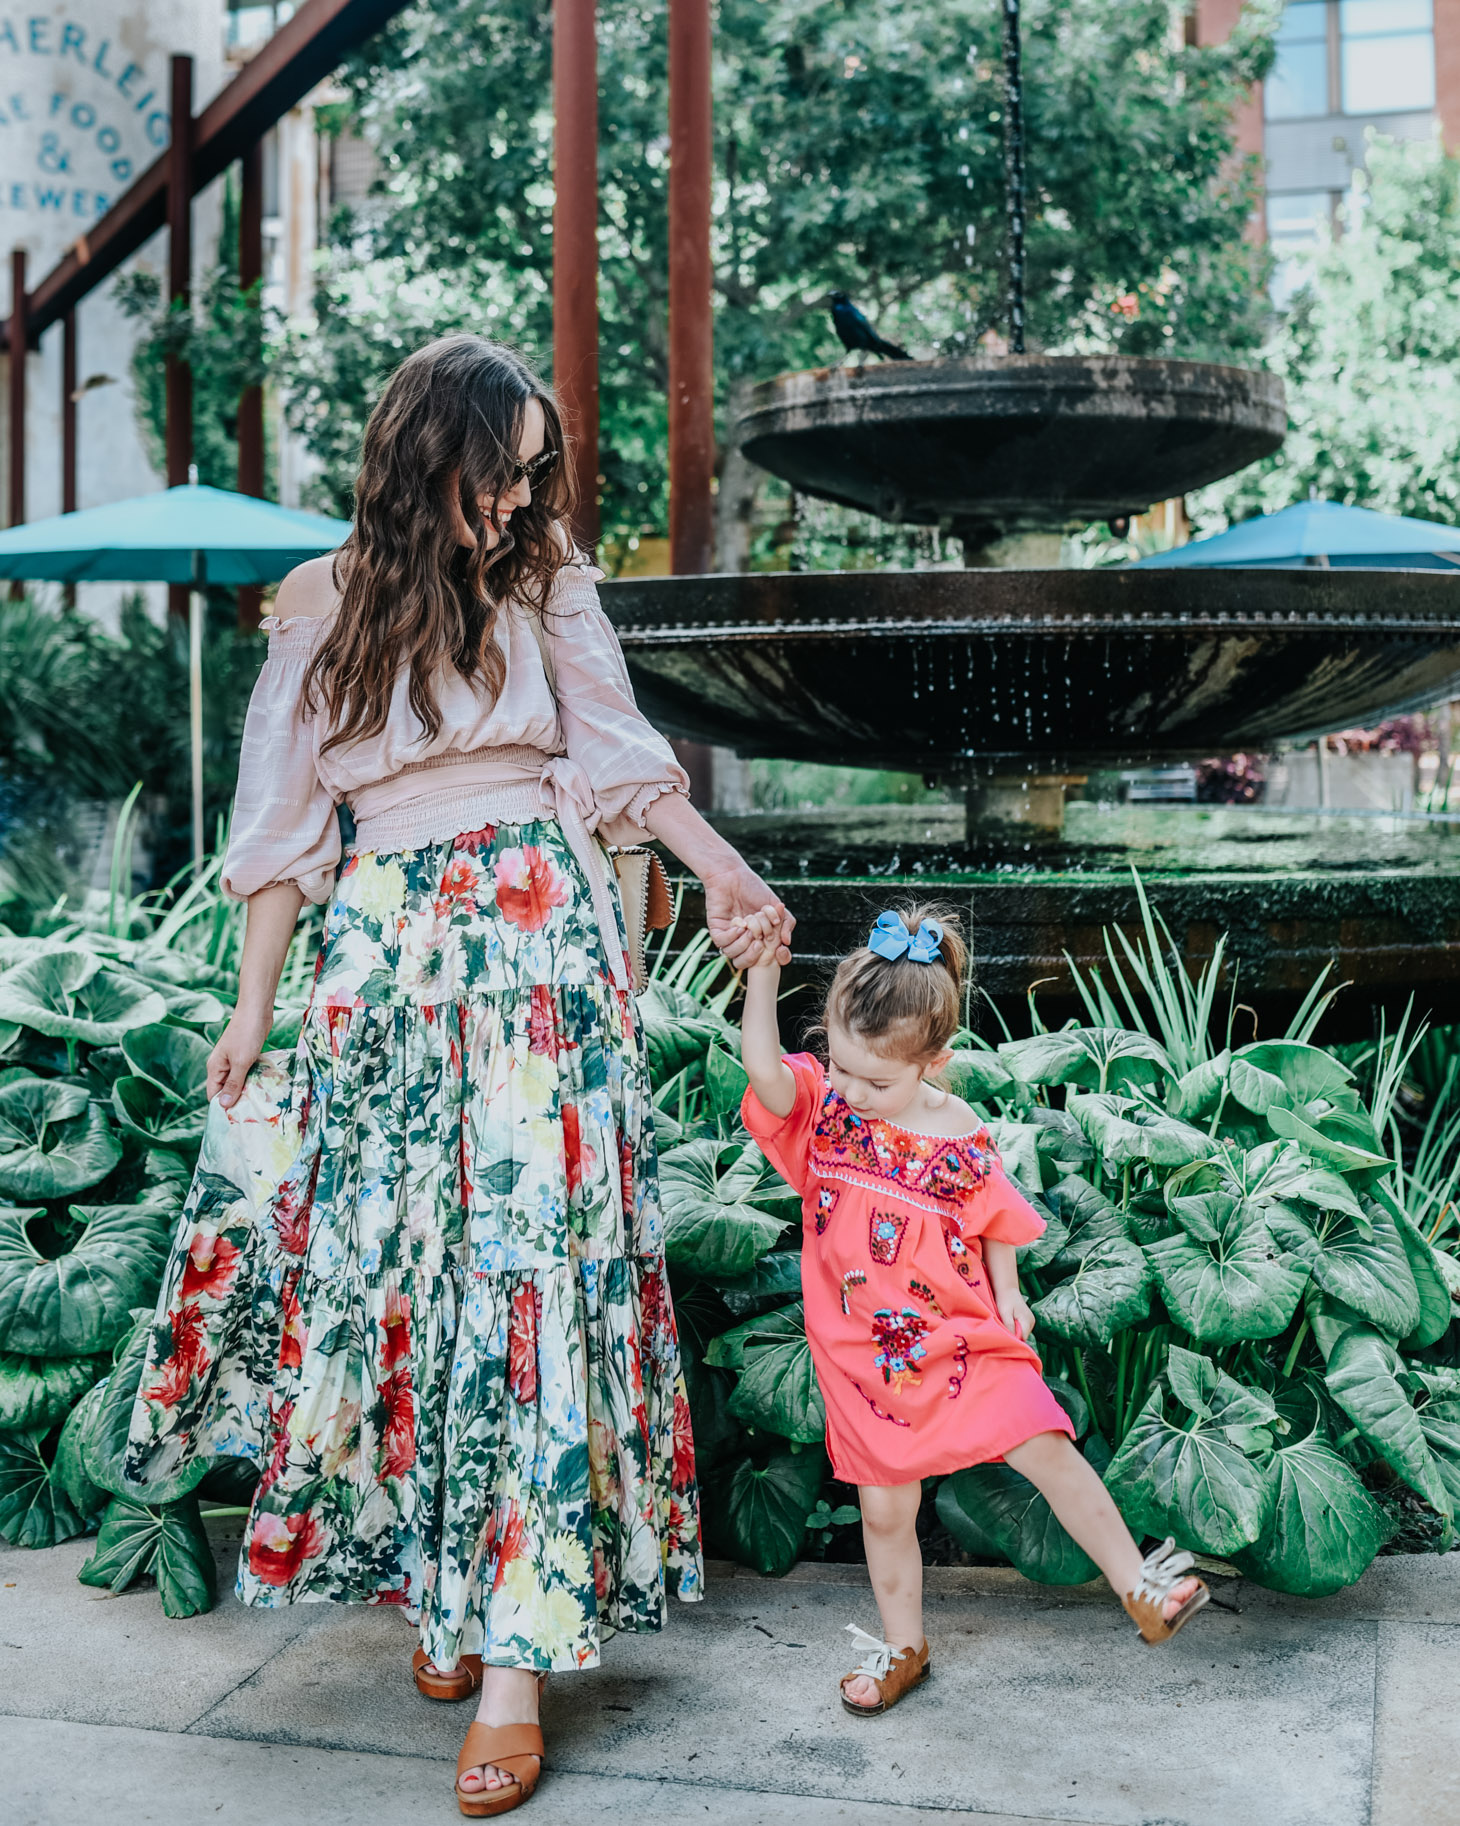 Top 10 Kid Friendly Activities in San Antonio by popular Texas travel blog, Lone Star Looking Glass: image of a mom and her daughter holding hands and standing in front of a large water fountain.